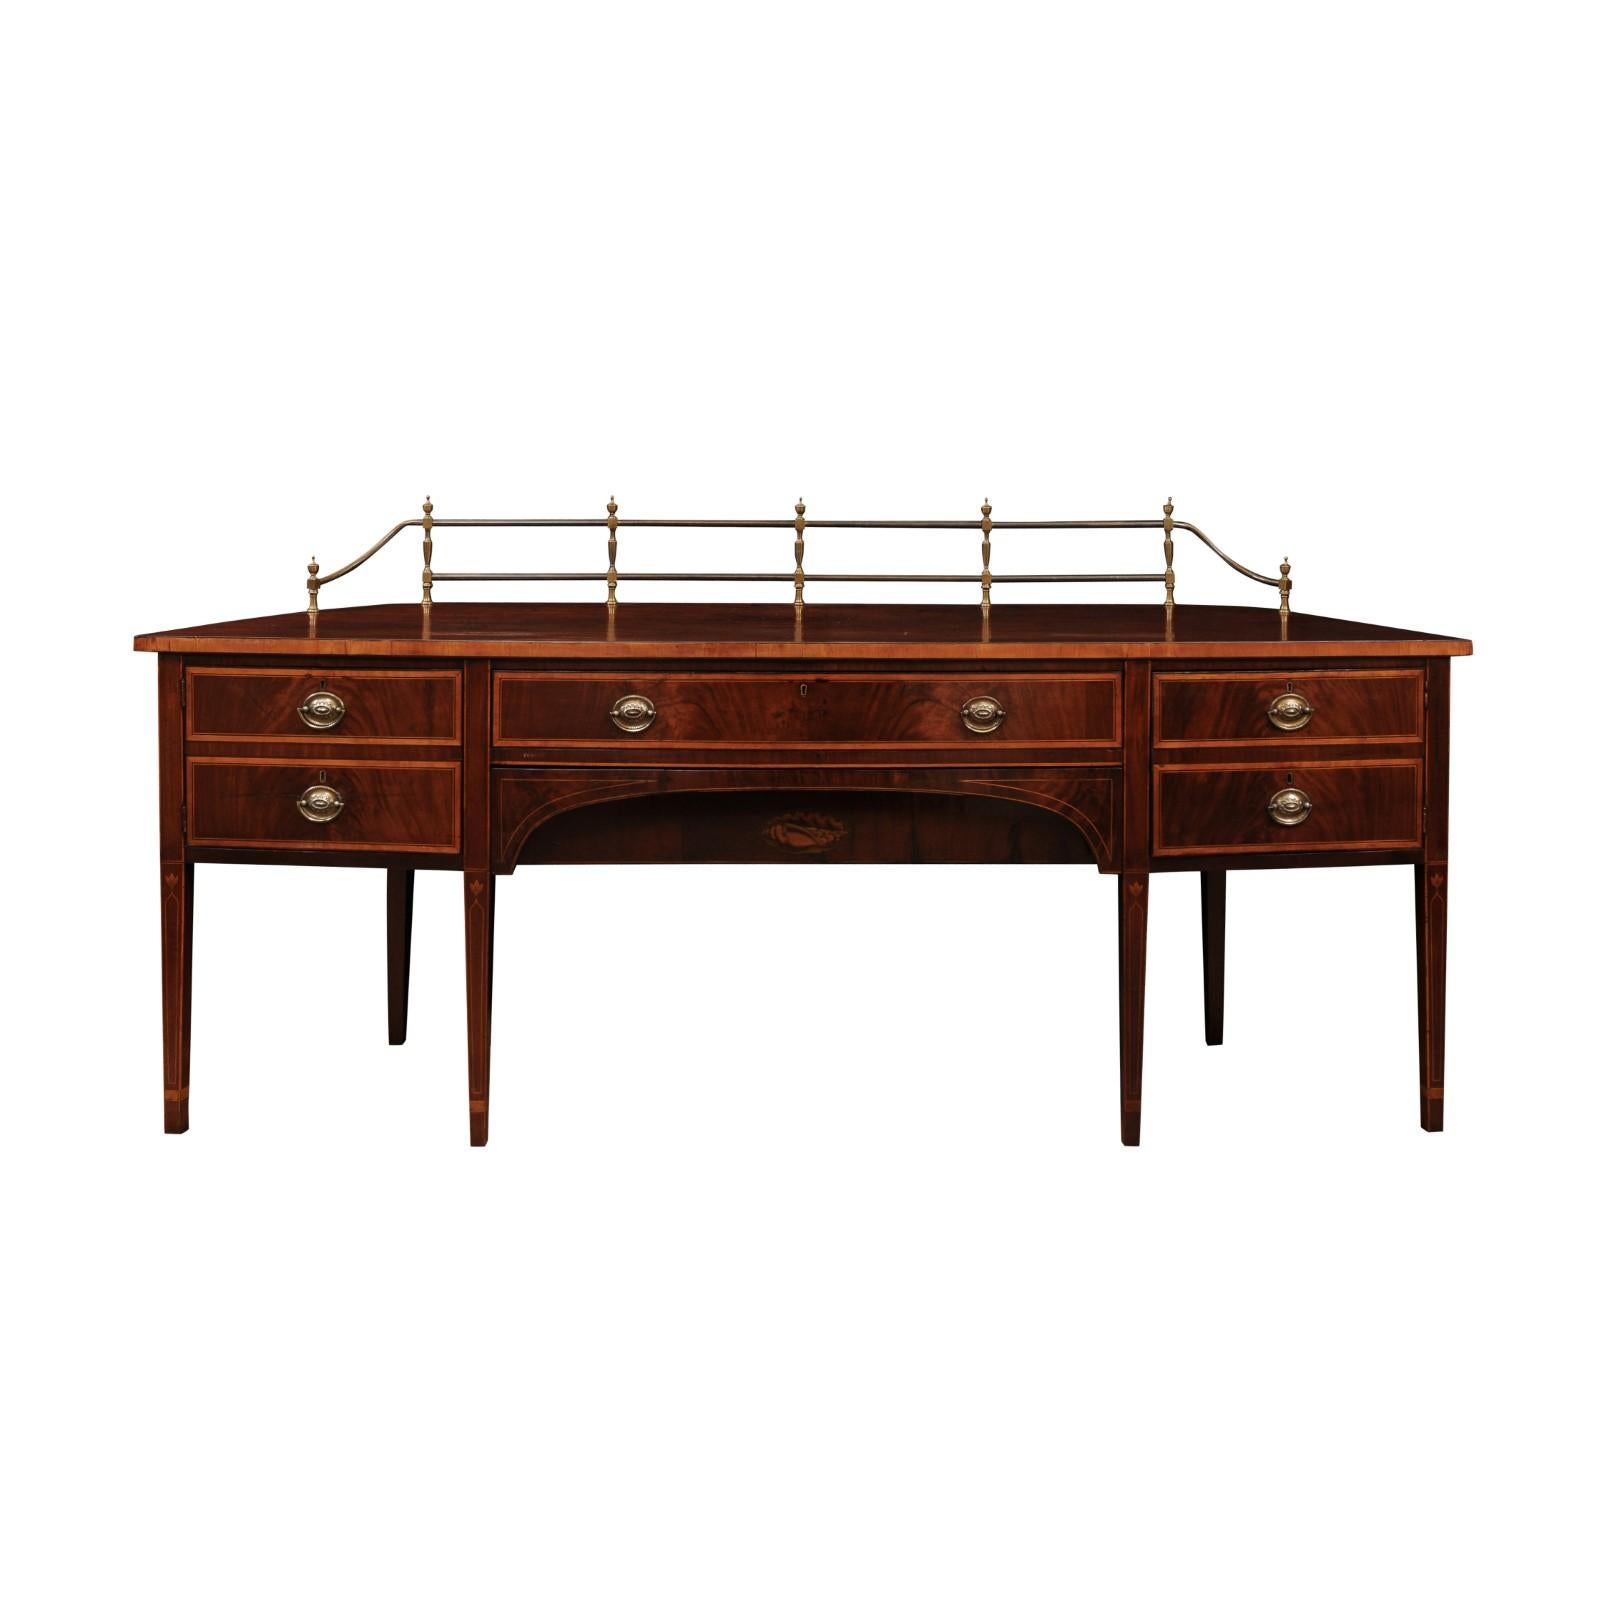 English George III Style 19th Century Sideboard in Mahogany with Brass Rail, shaped Sides and Shell Inlay